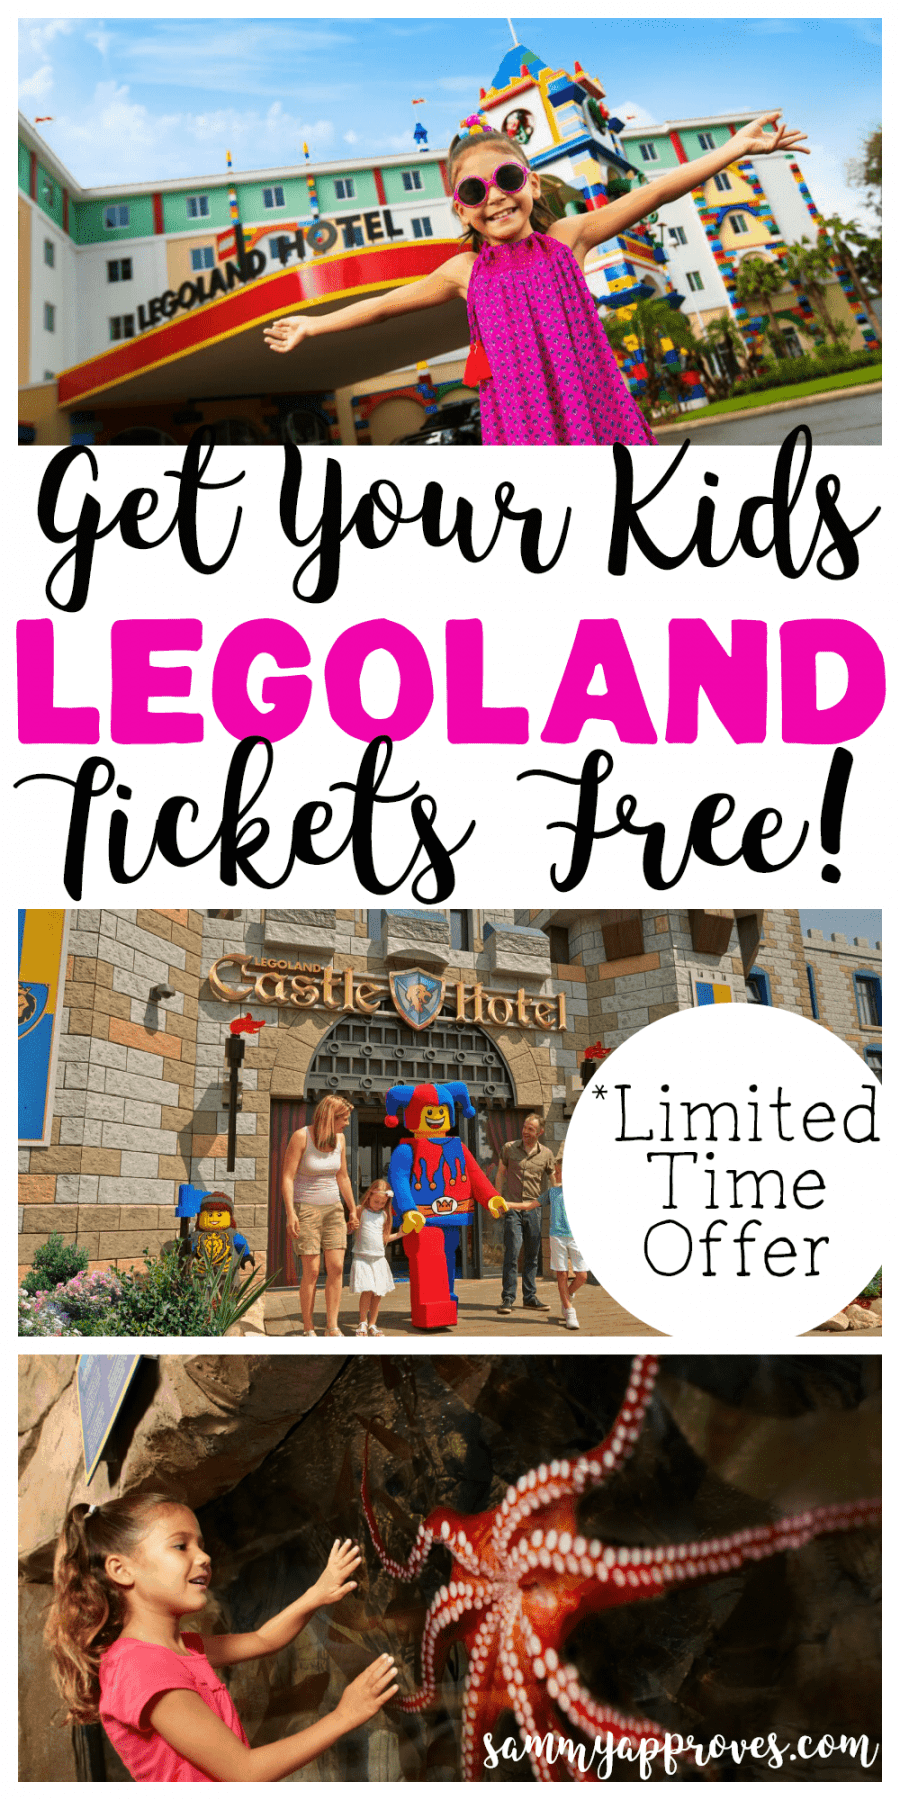 Get Your Kids LEGOLAND Tickets Free! | Limited Time Offer